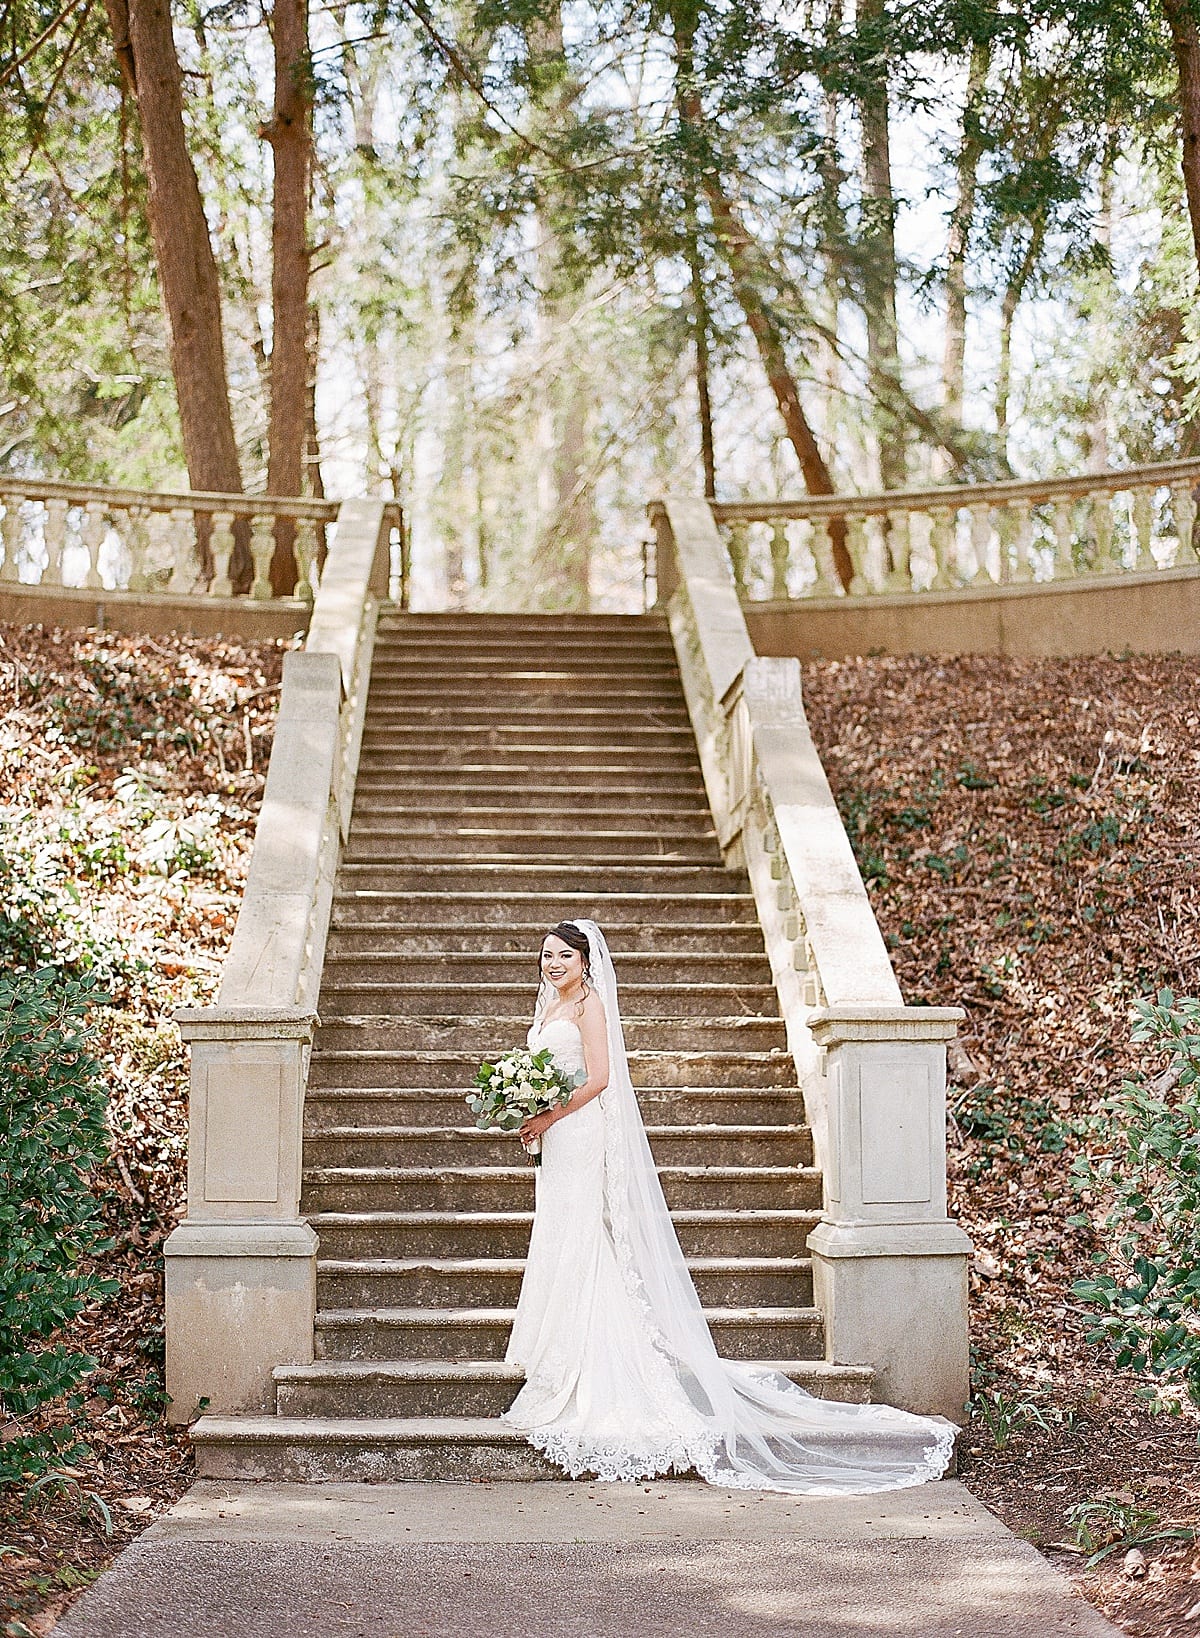 Cator Woolford Gardens Bride on Stairs Photo